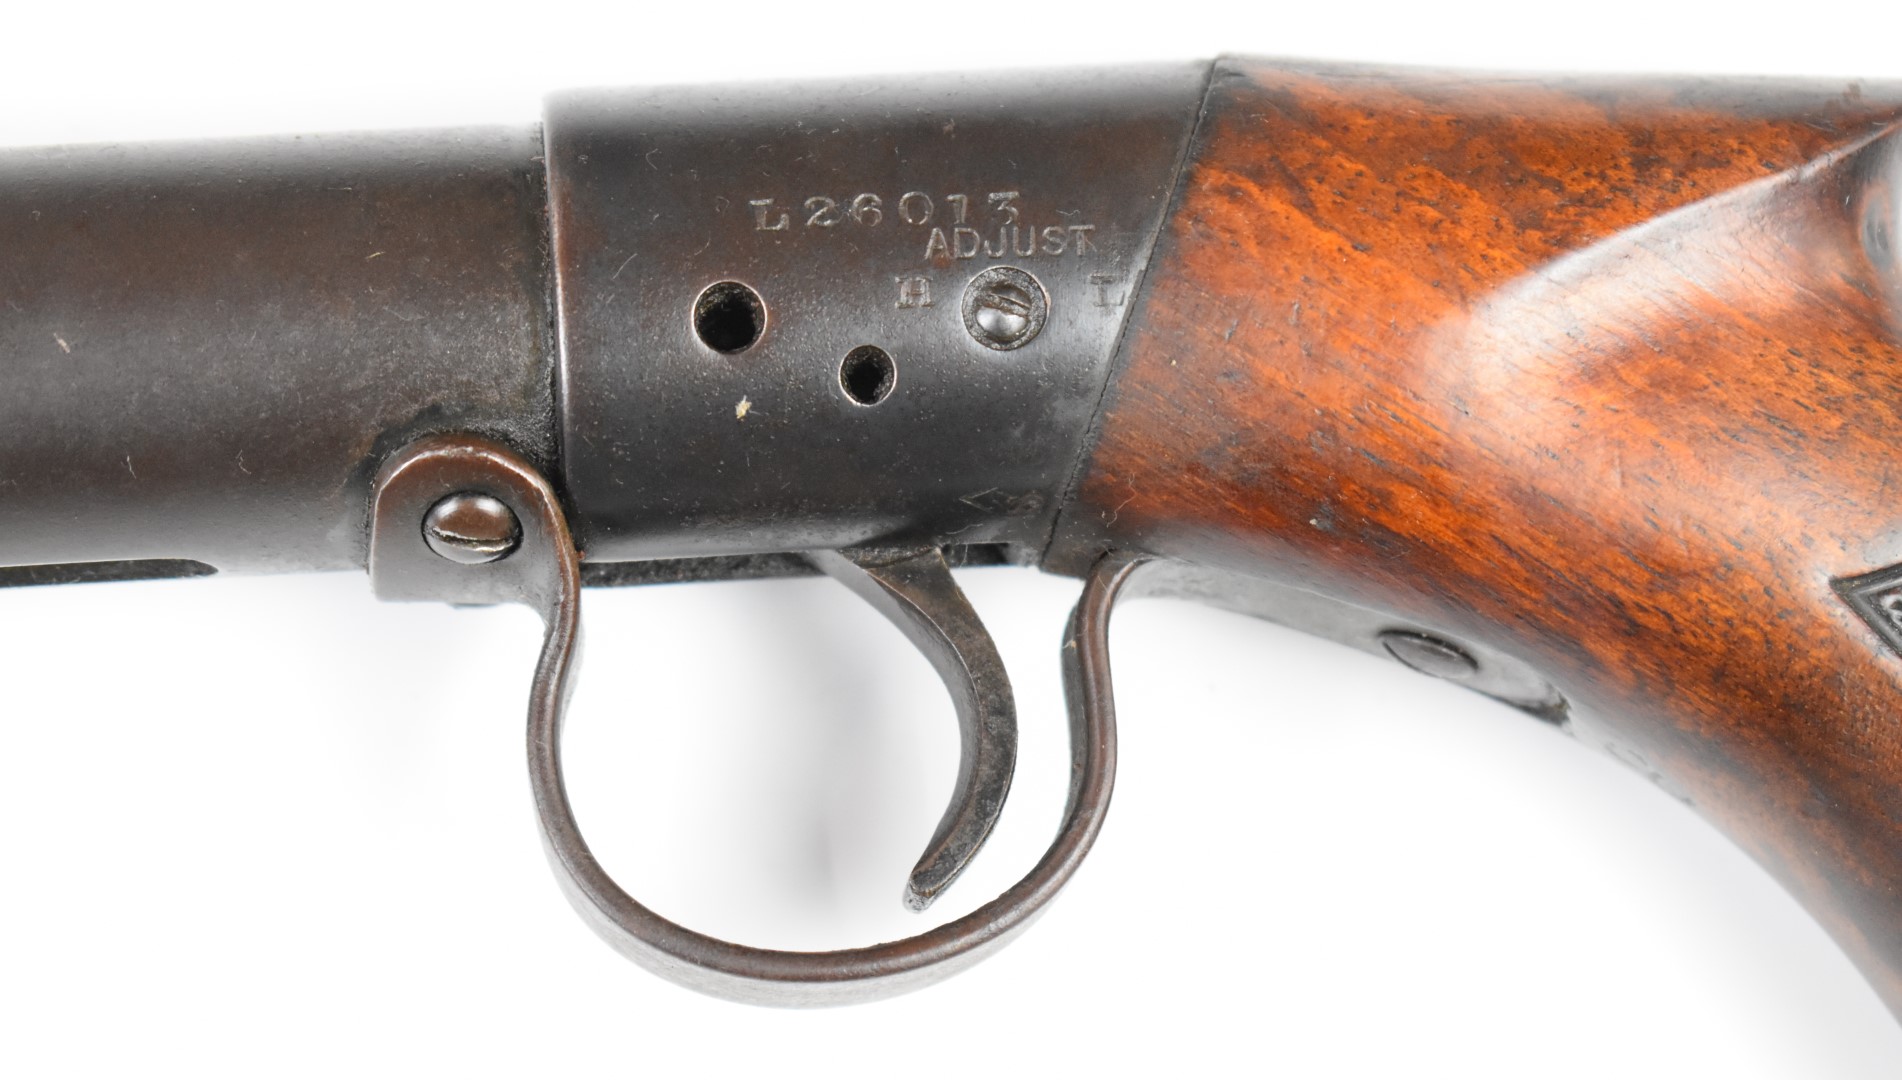 BSA Standard No 1 Light or Ladies .177 under-lever air rifle with chequered semi-pistol grip and - Image 6 of 7